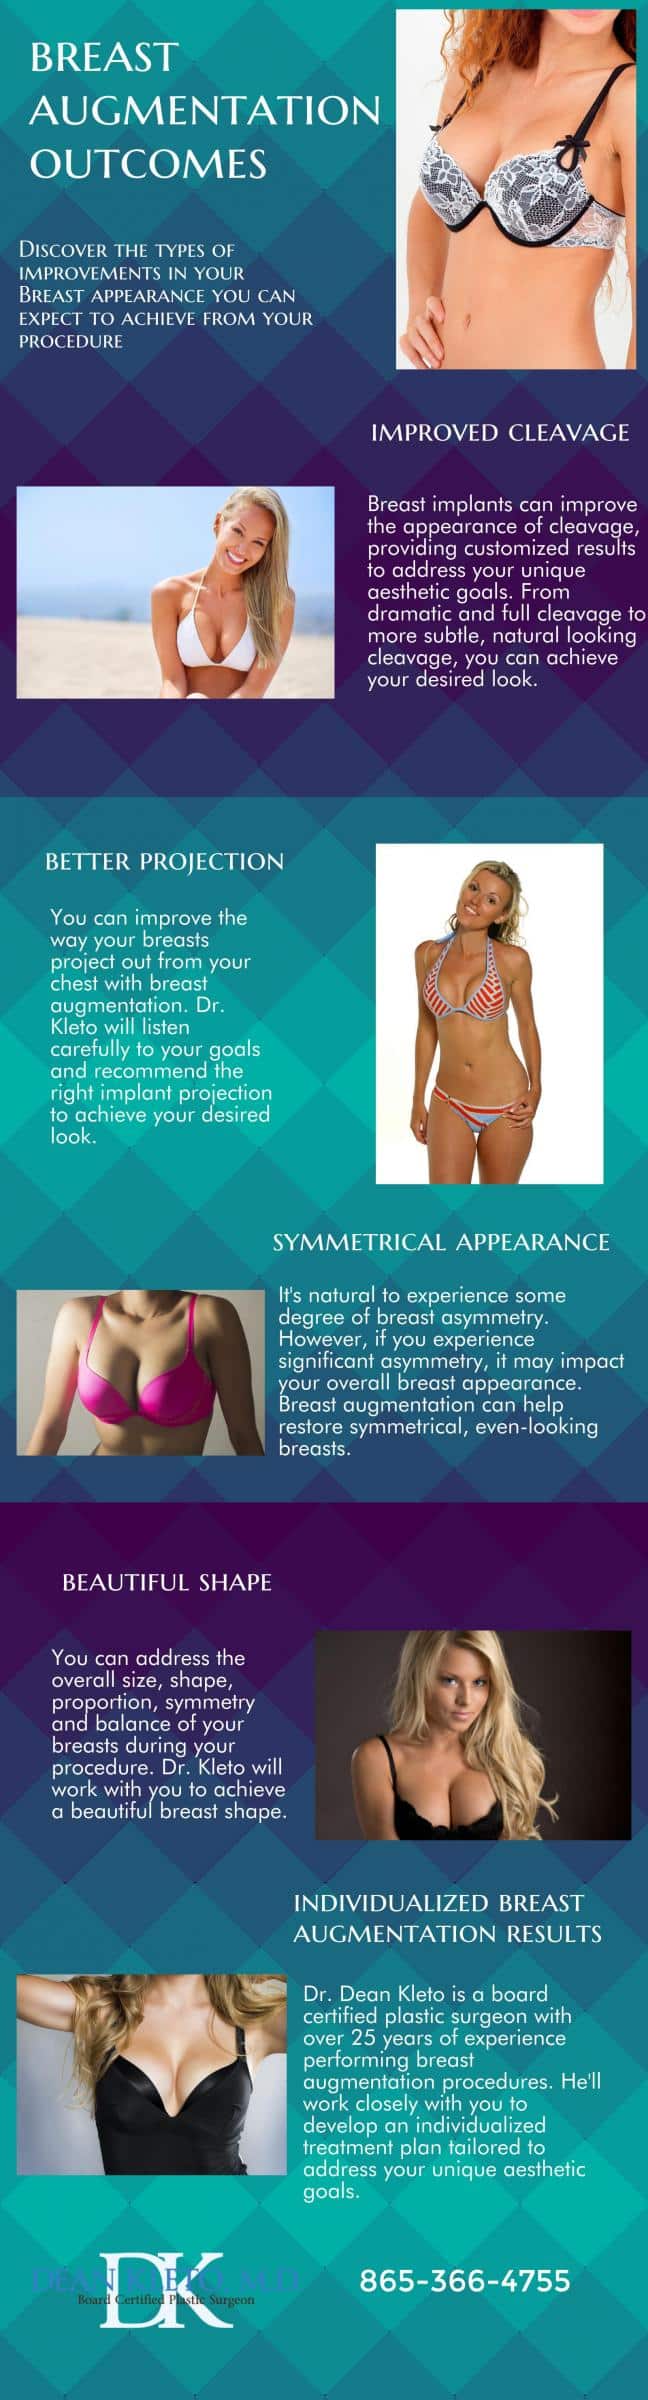 breast augmentation outcomes infographic - Knoxville, TN